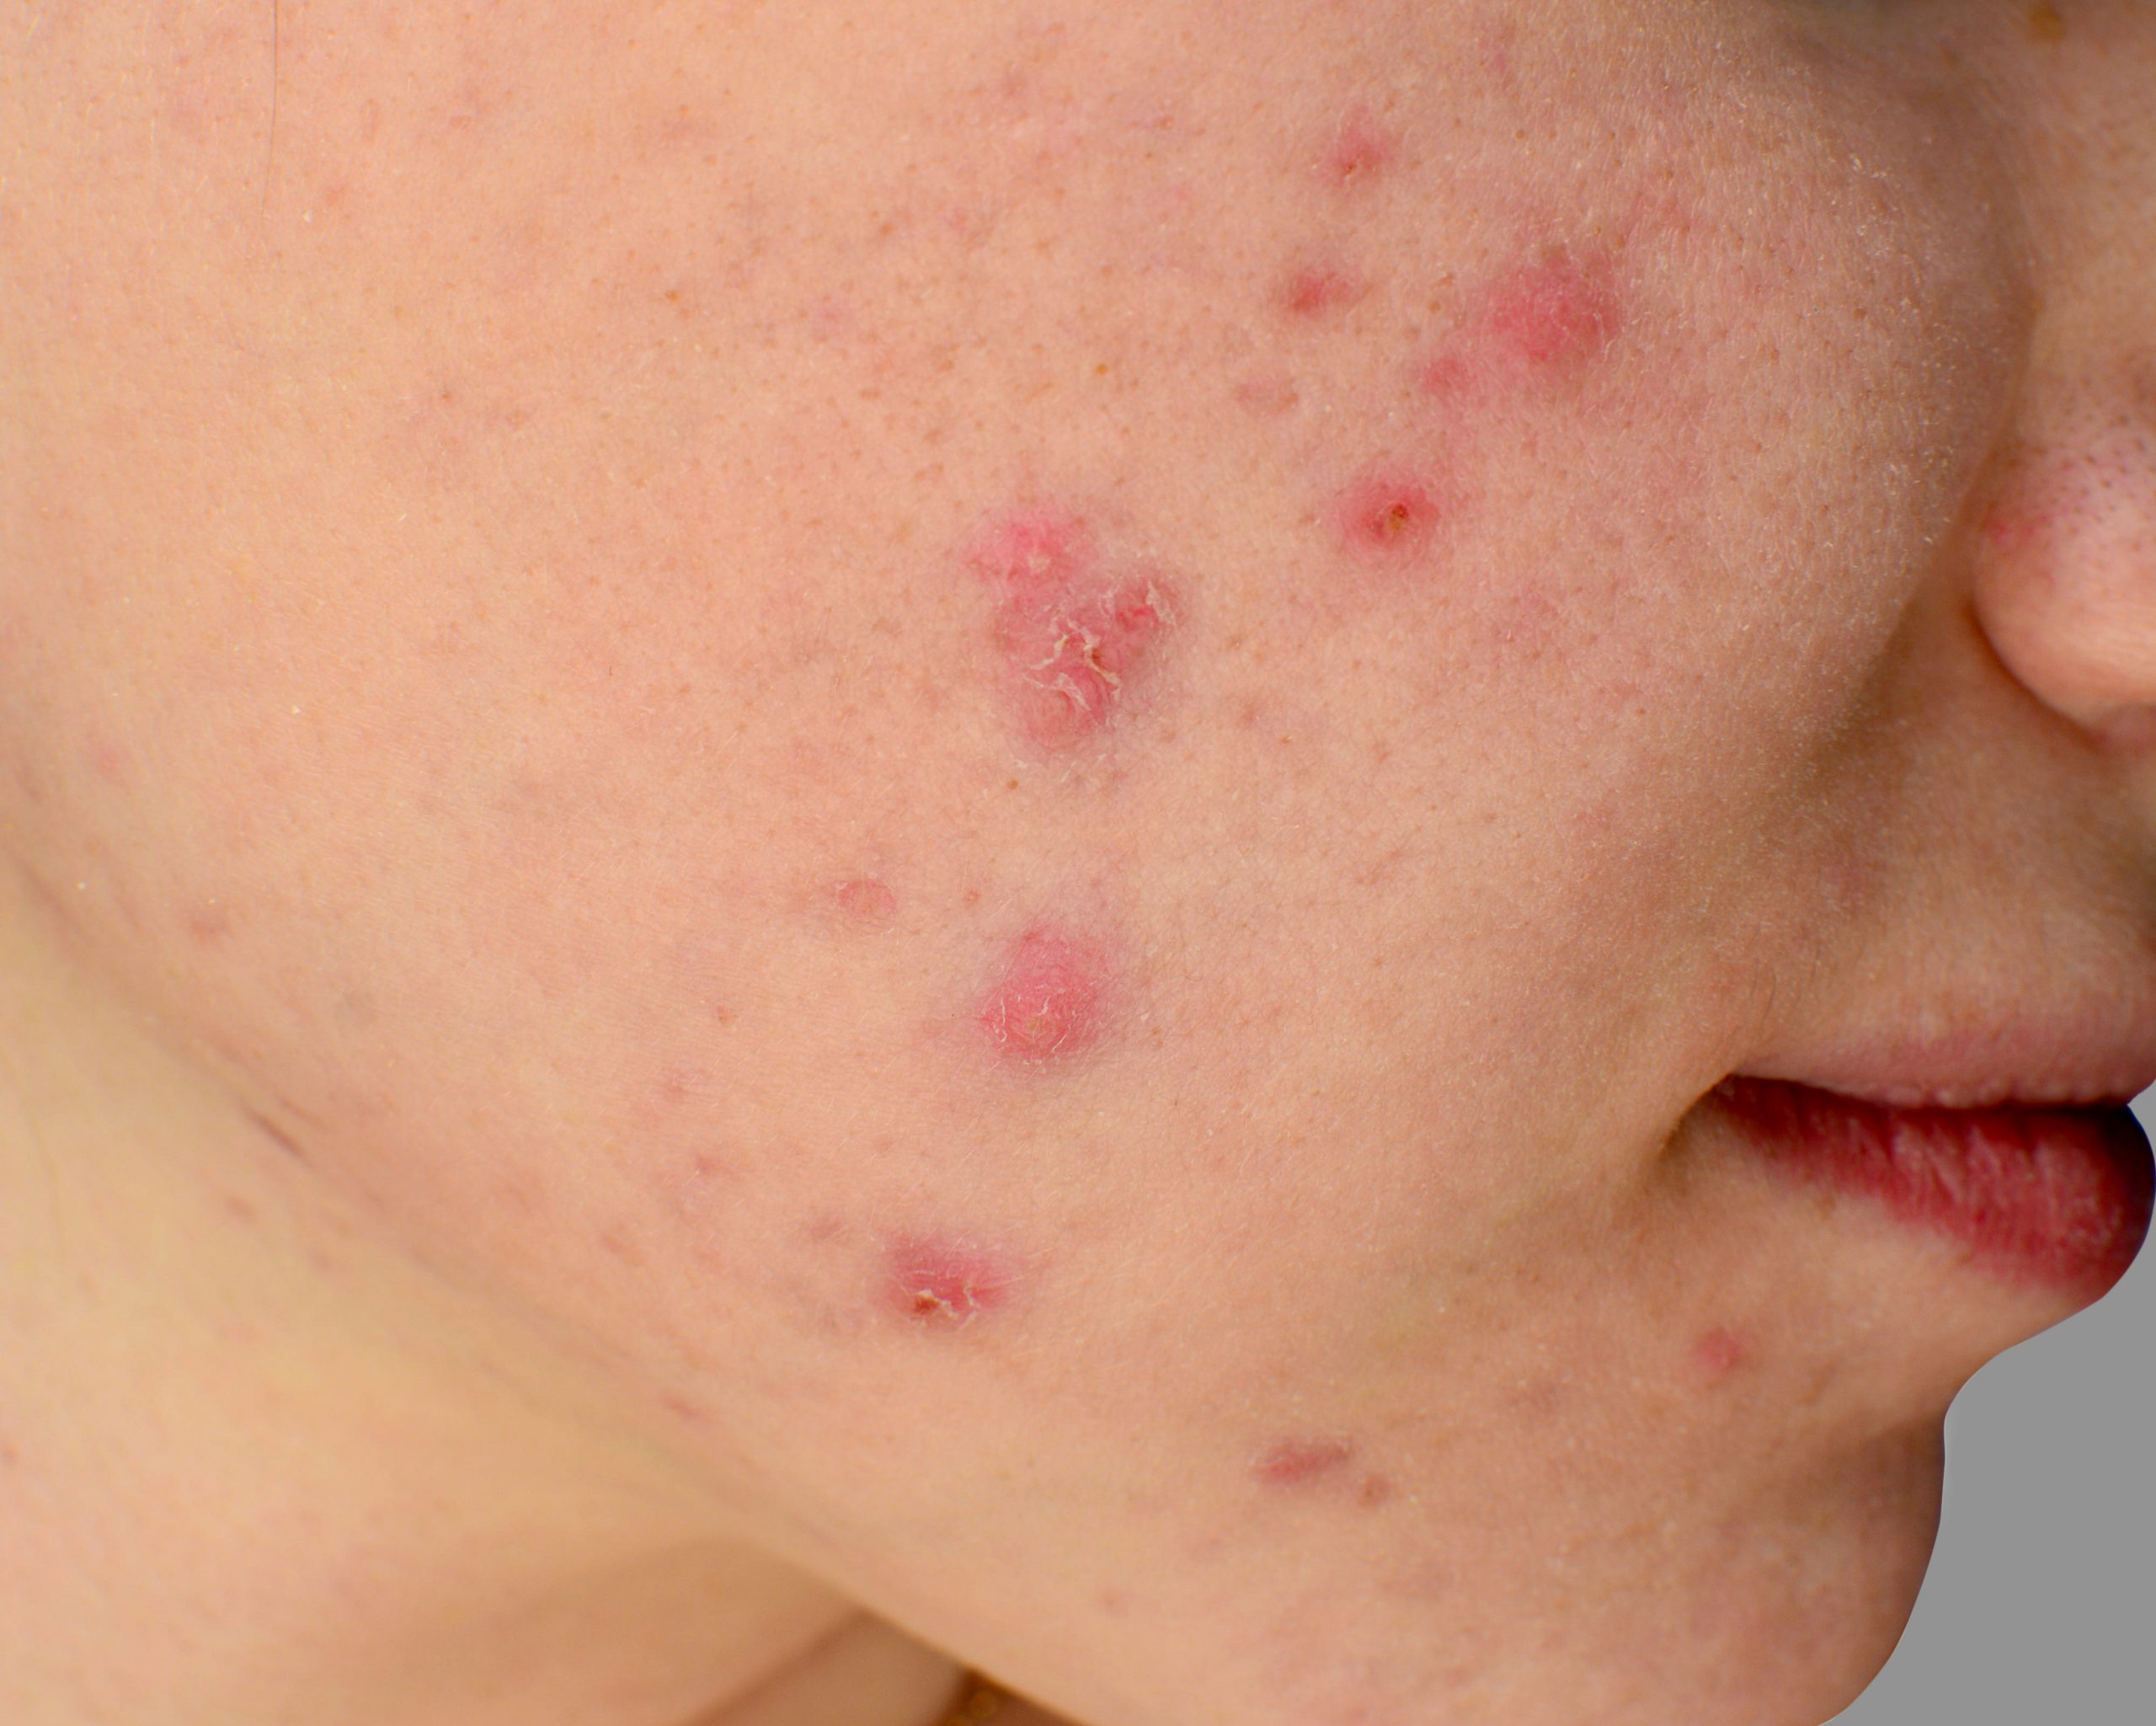 Acne skin because the disorders of sebaceous glands productions, Human skin Acne